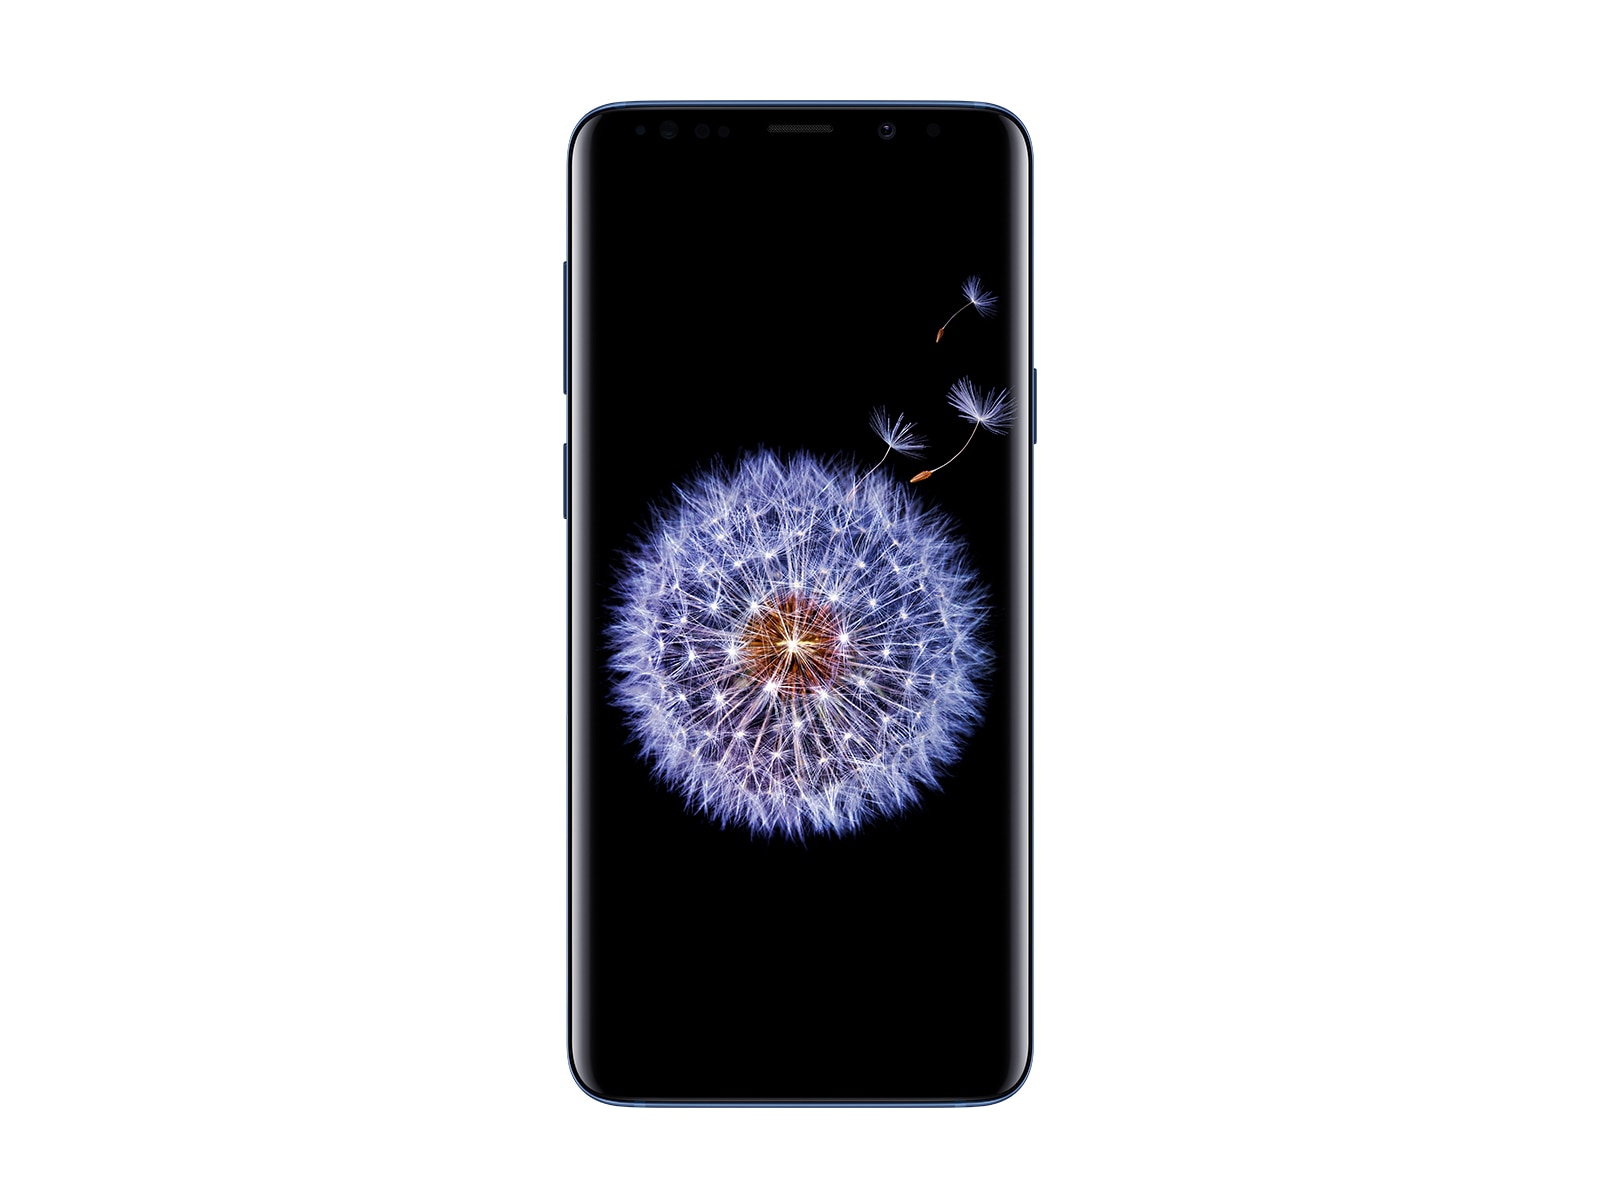 Thumbnail image of Galaxy S9+ 64GB (US Cellular)